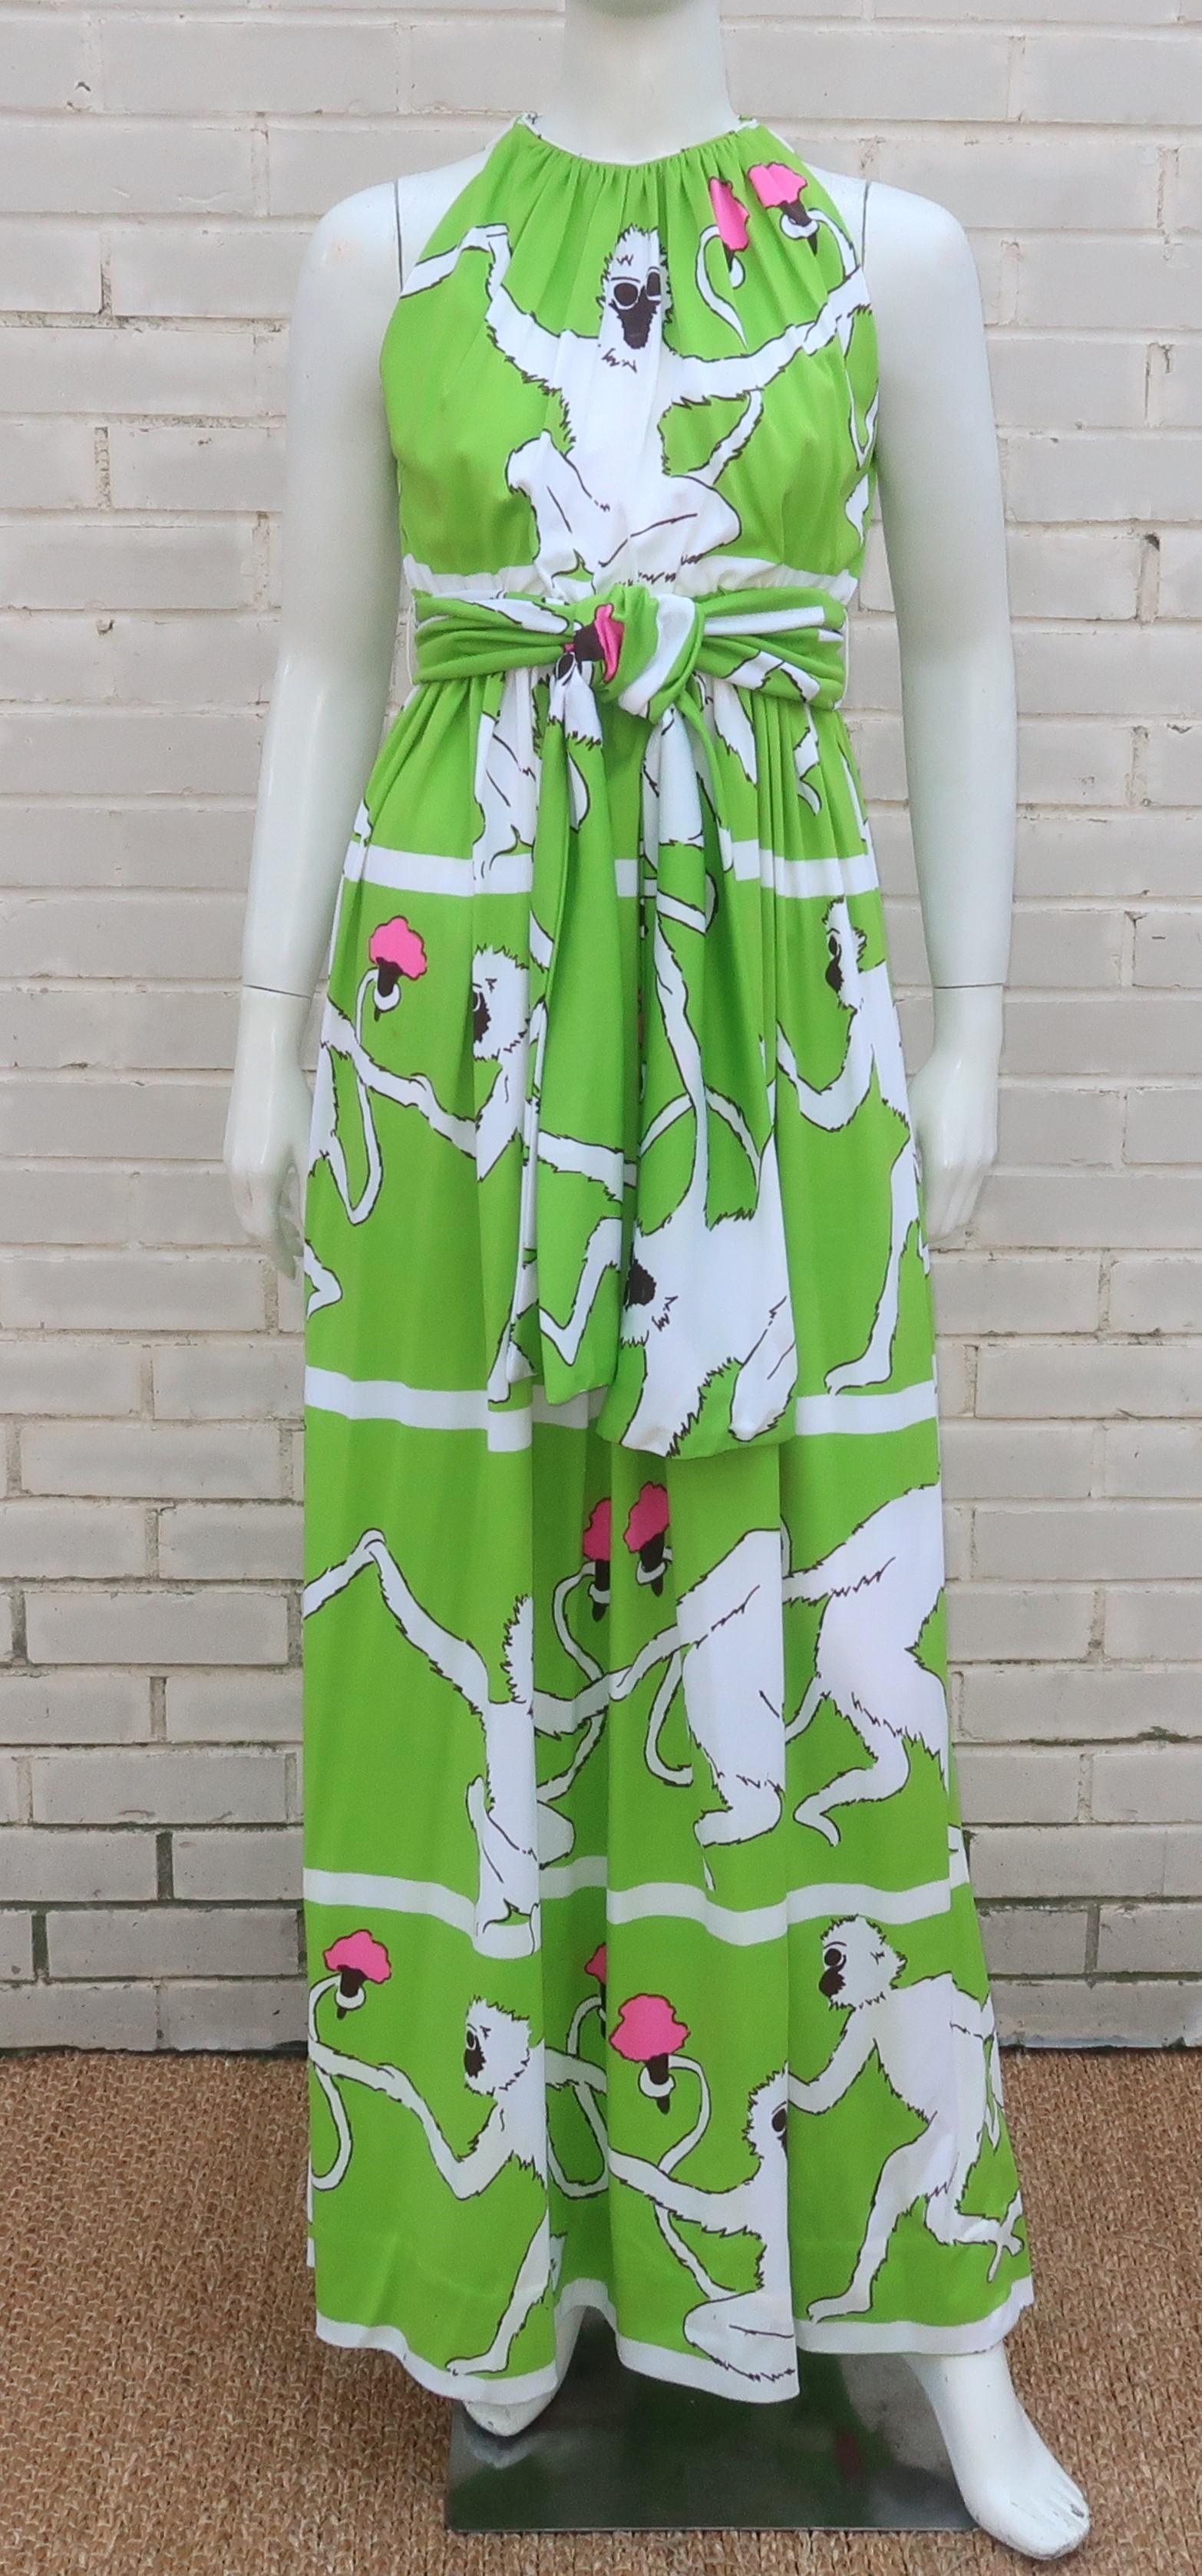 1970's jersey maxi dress with a racer back style neckline and a whimsical monkey print by Donald Brooks.  The dress zips up to the back waistline and ties at the top of the keyhole back.  The monkey print is in a striking white and almost black